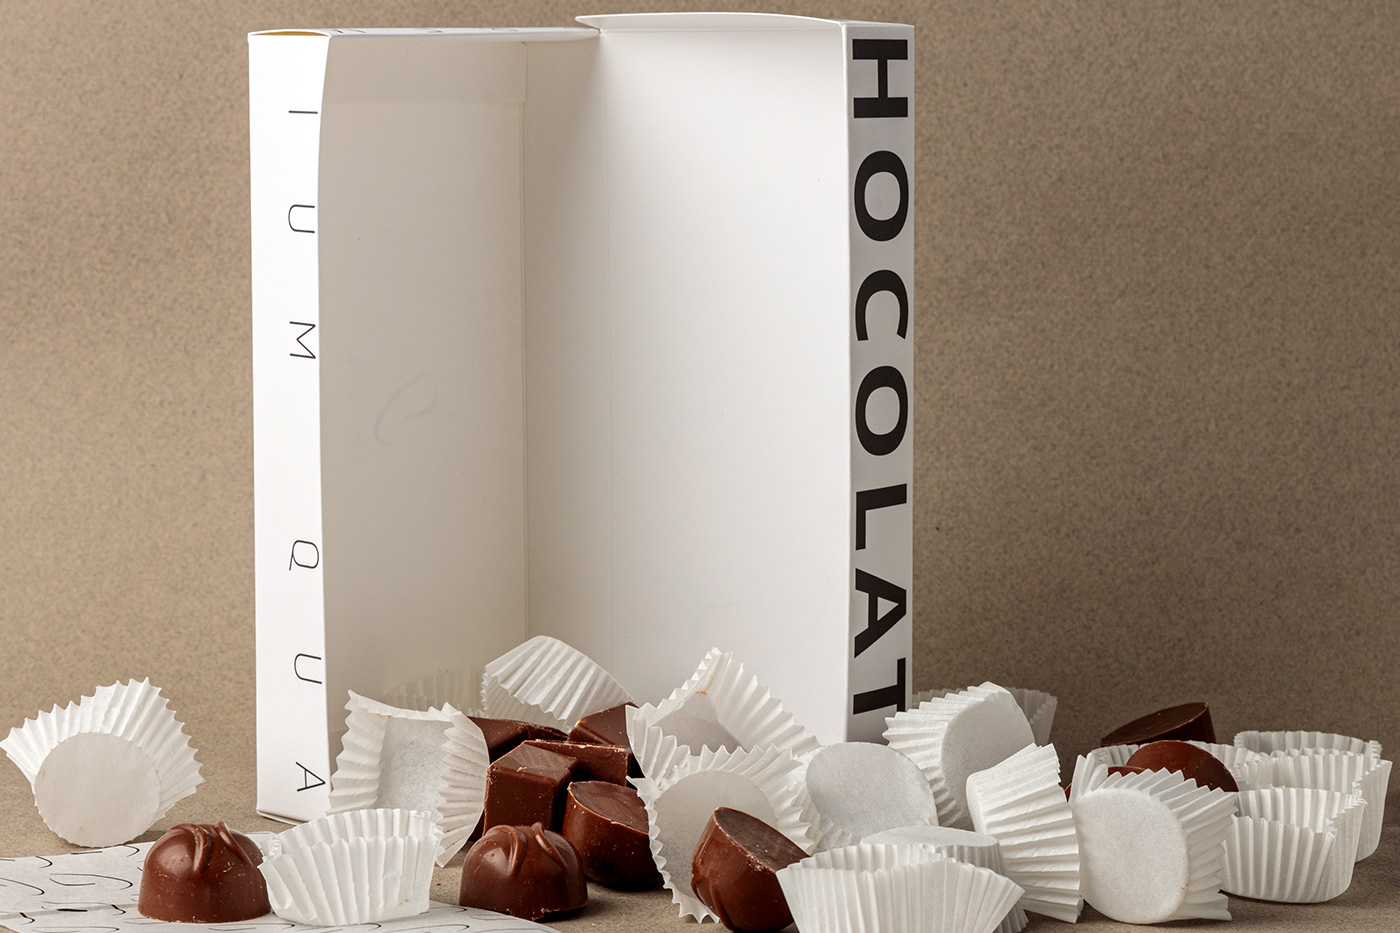 Chocolate bar packaging package design  brand identity